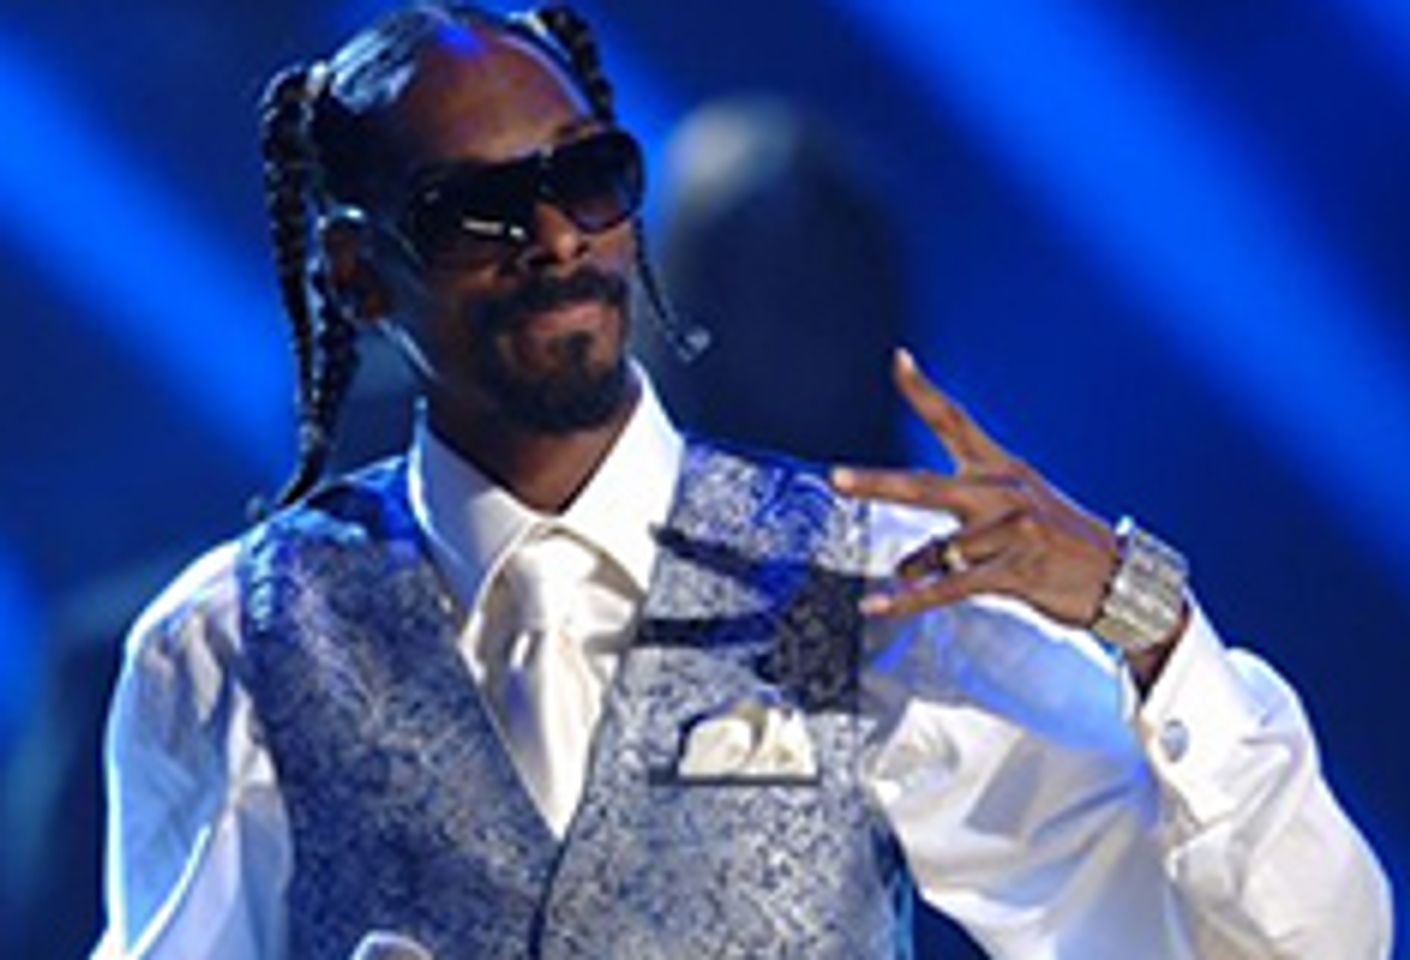 Snoop Dogg to Perform at Exotic Erotic Ball